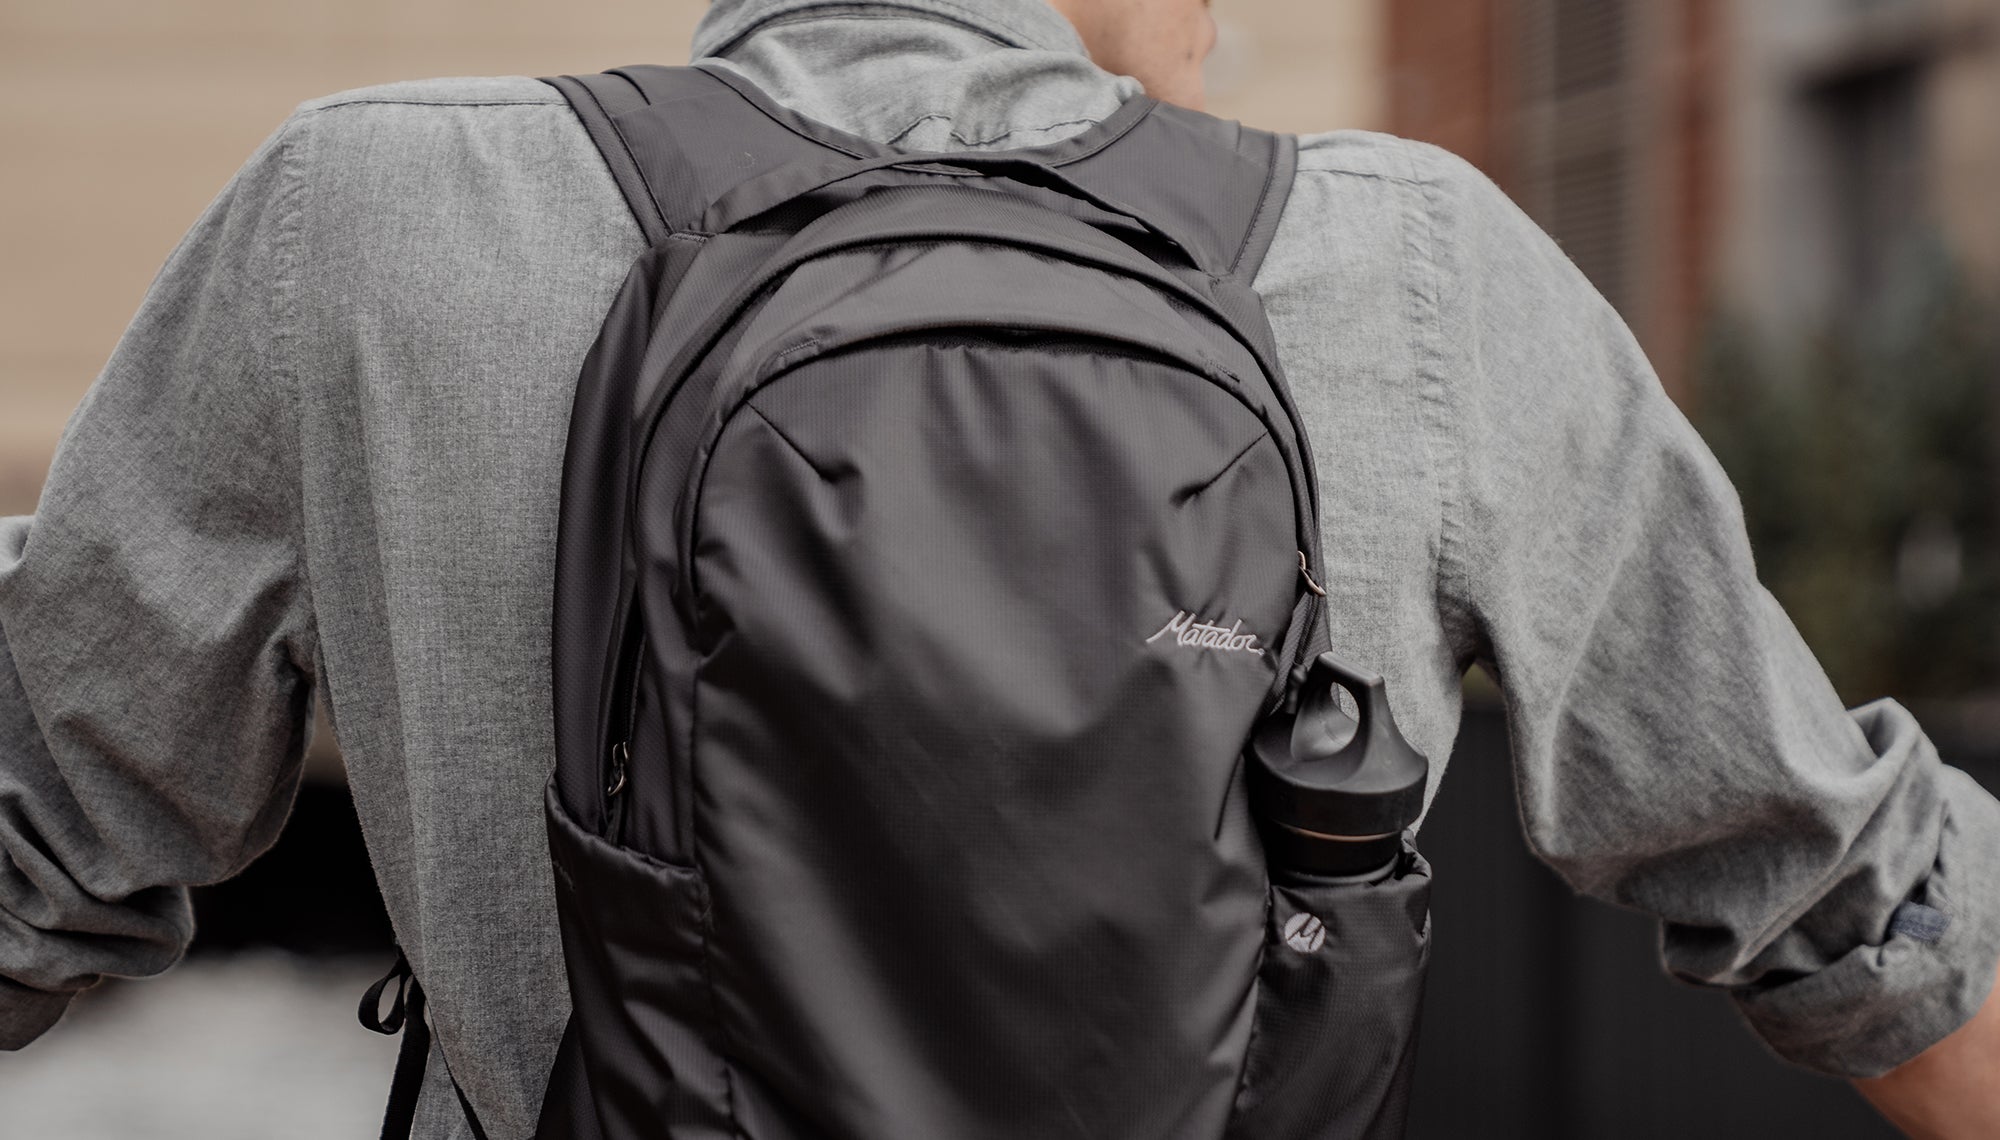 Close up view of backpack on man's back